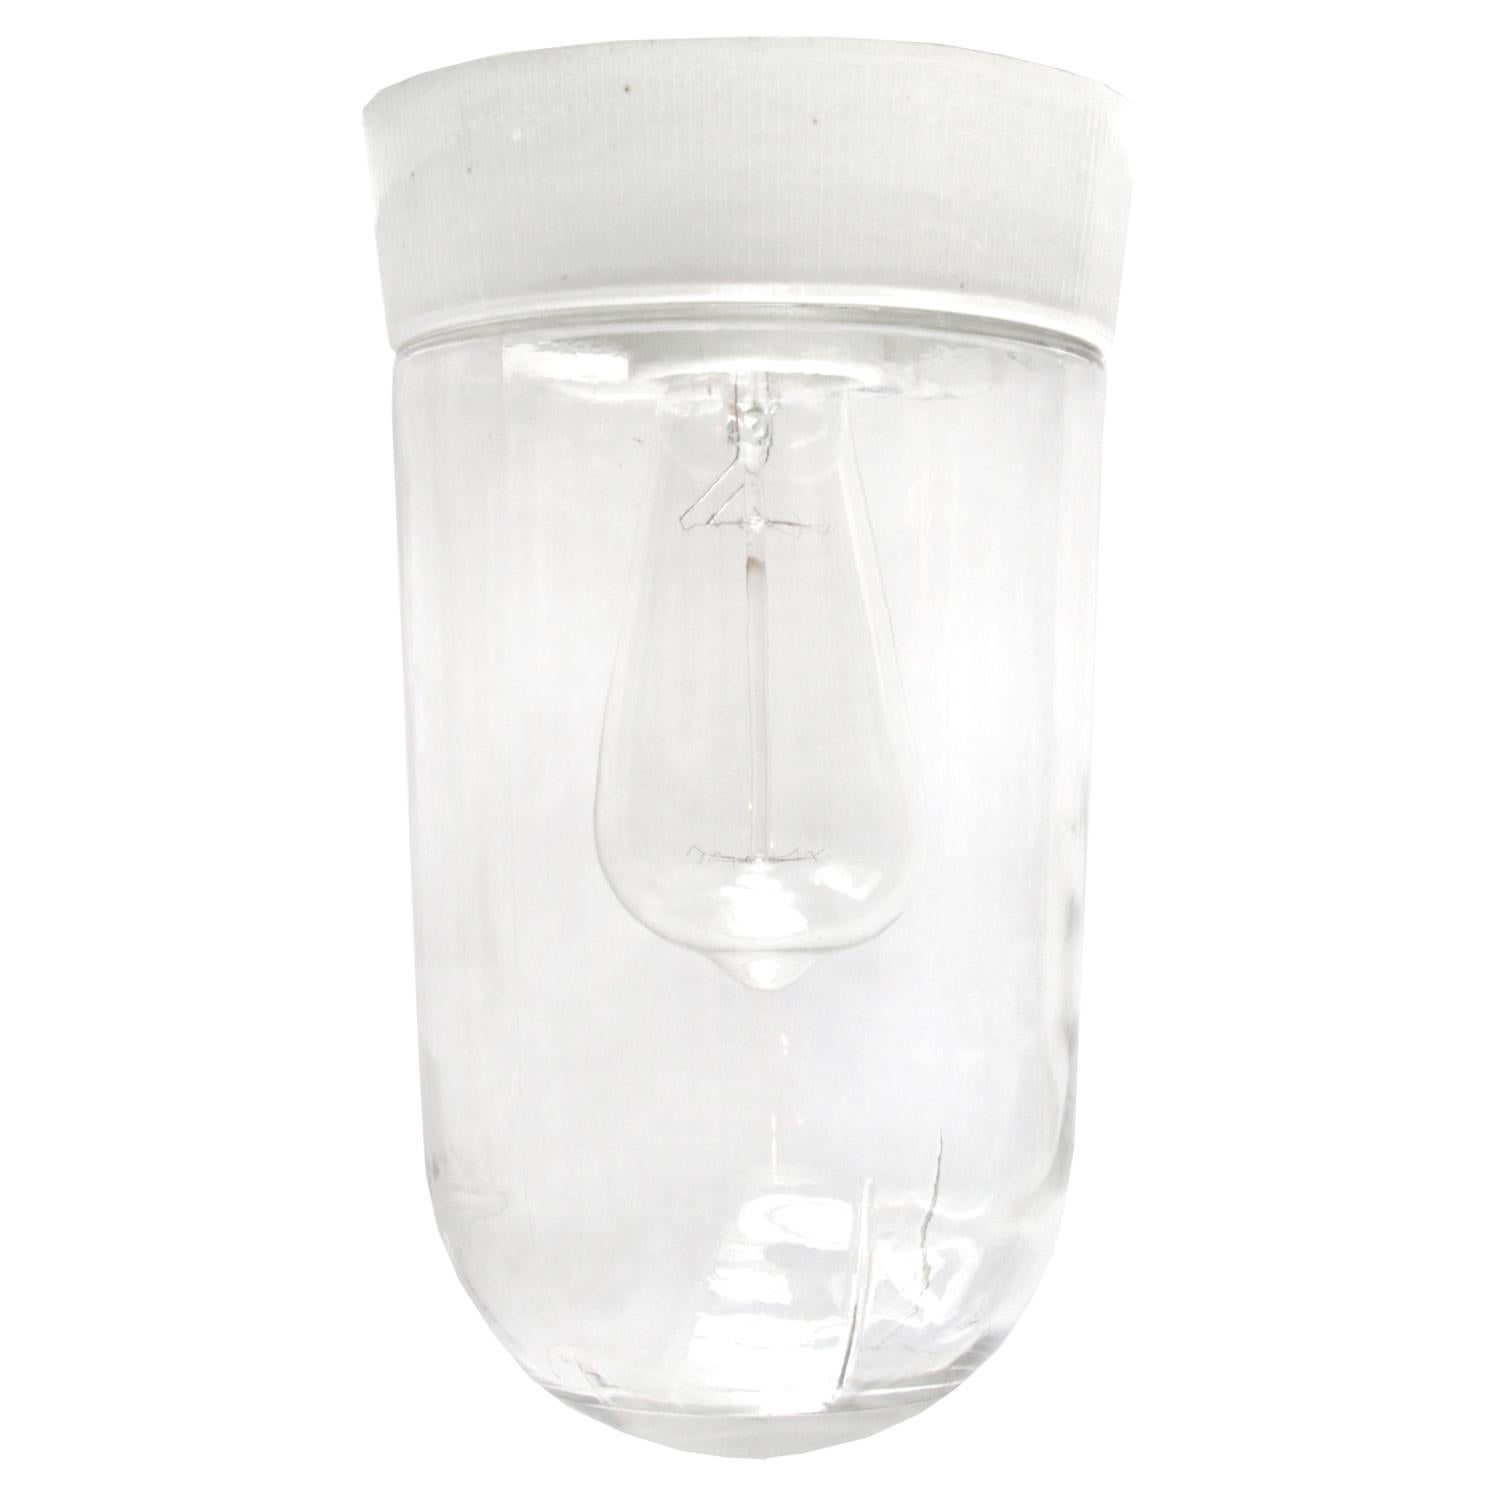 White porcelain. Clear glass.
Two conductors. No ground.

Measure: Weight 1.5 kg / 3.3 lb

Priced per individual item. All lamps have been made suitable by international standards for incandescent light bulbs, energy-efficient and LED bulbs.